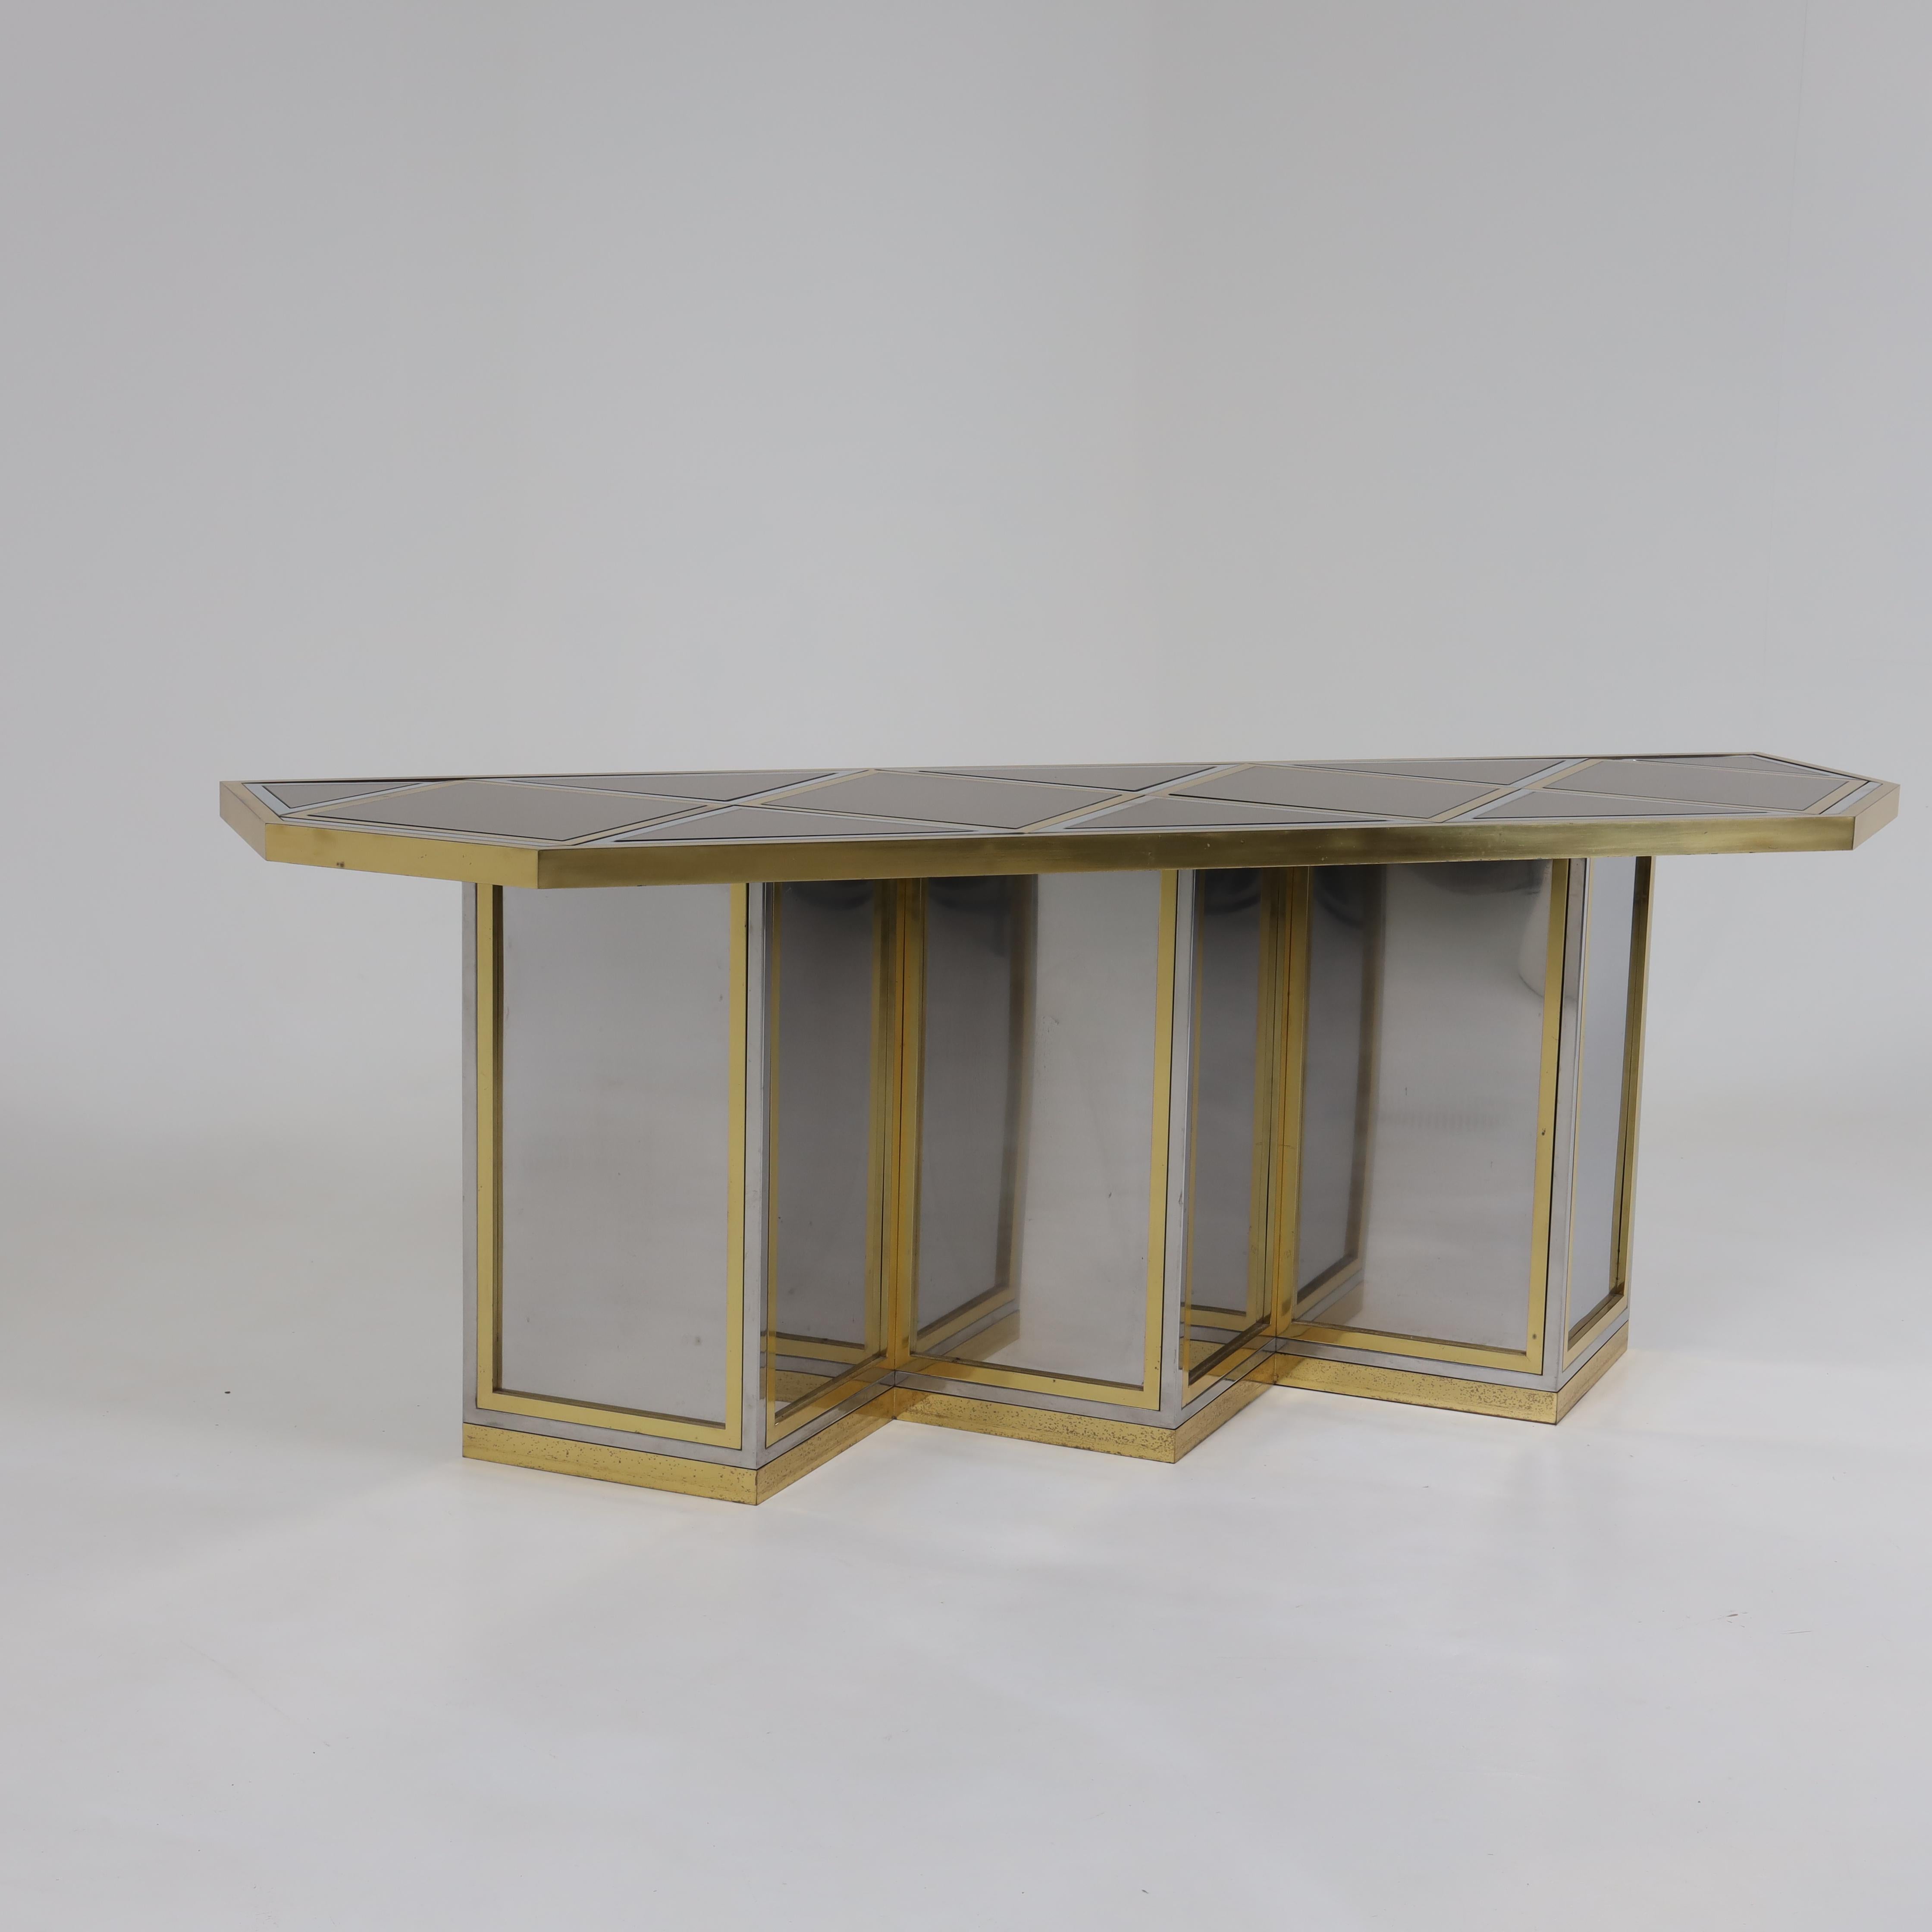 Italian Modernist console table attributed to Sandro Petti. 
Patinated brass, chrome and mirrored glass laid out in a diamond.
shaped geometric pattern across the top.